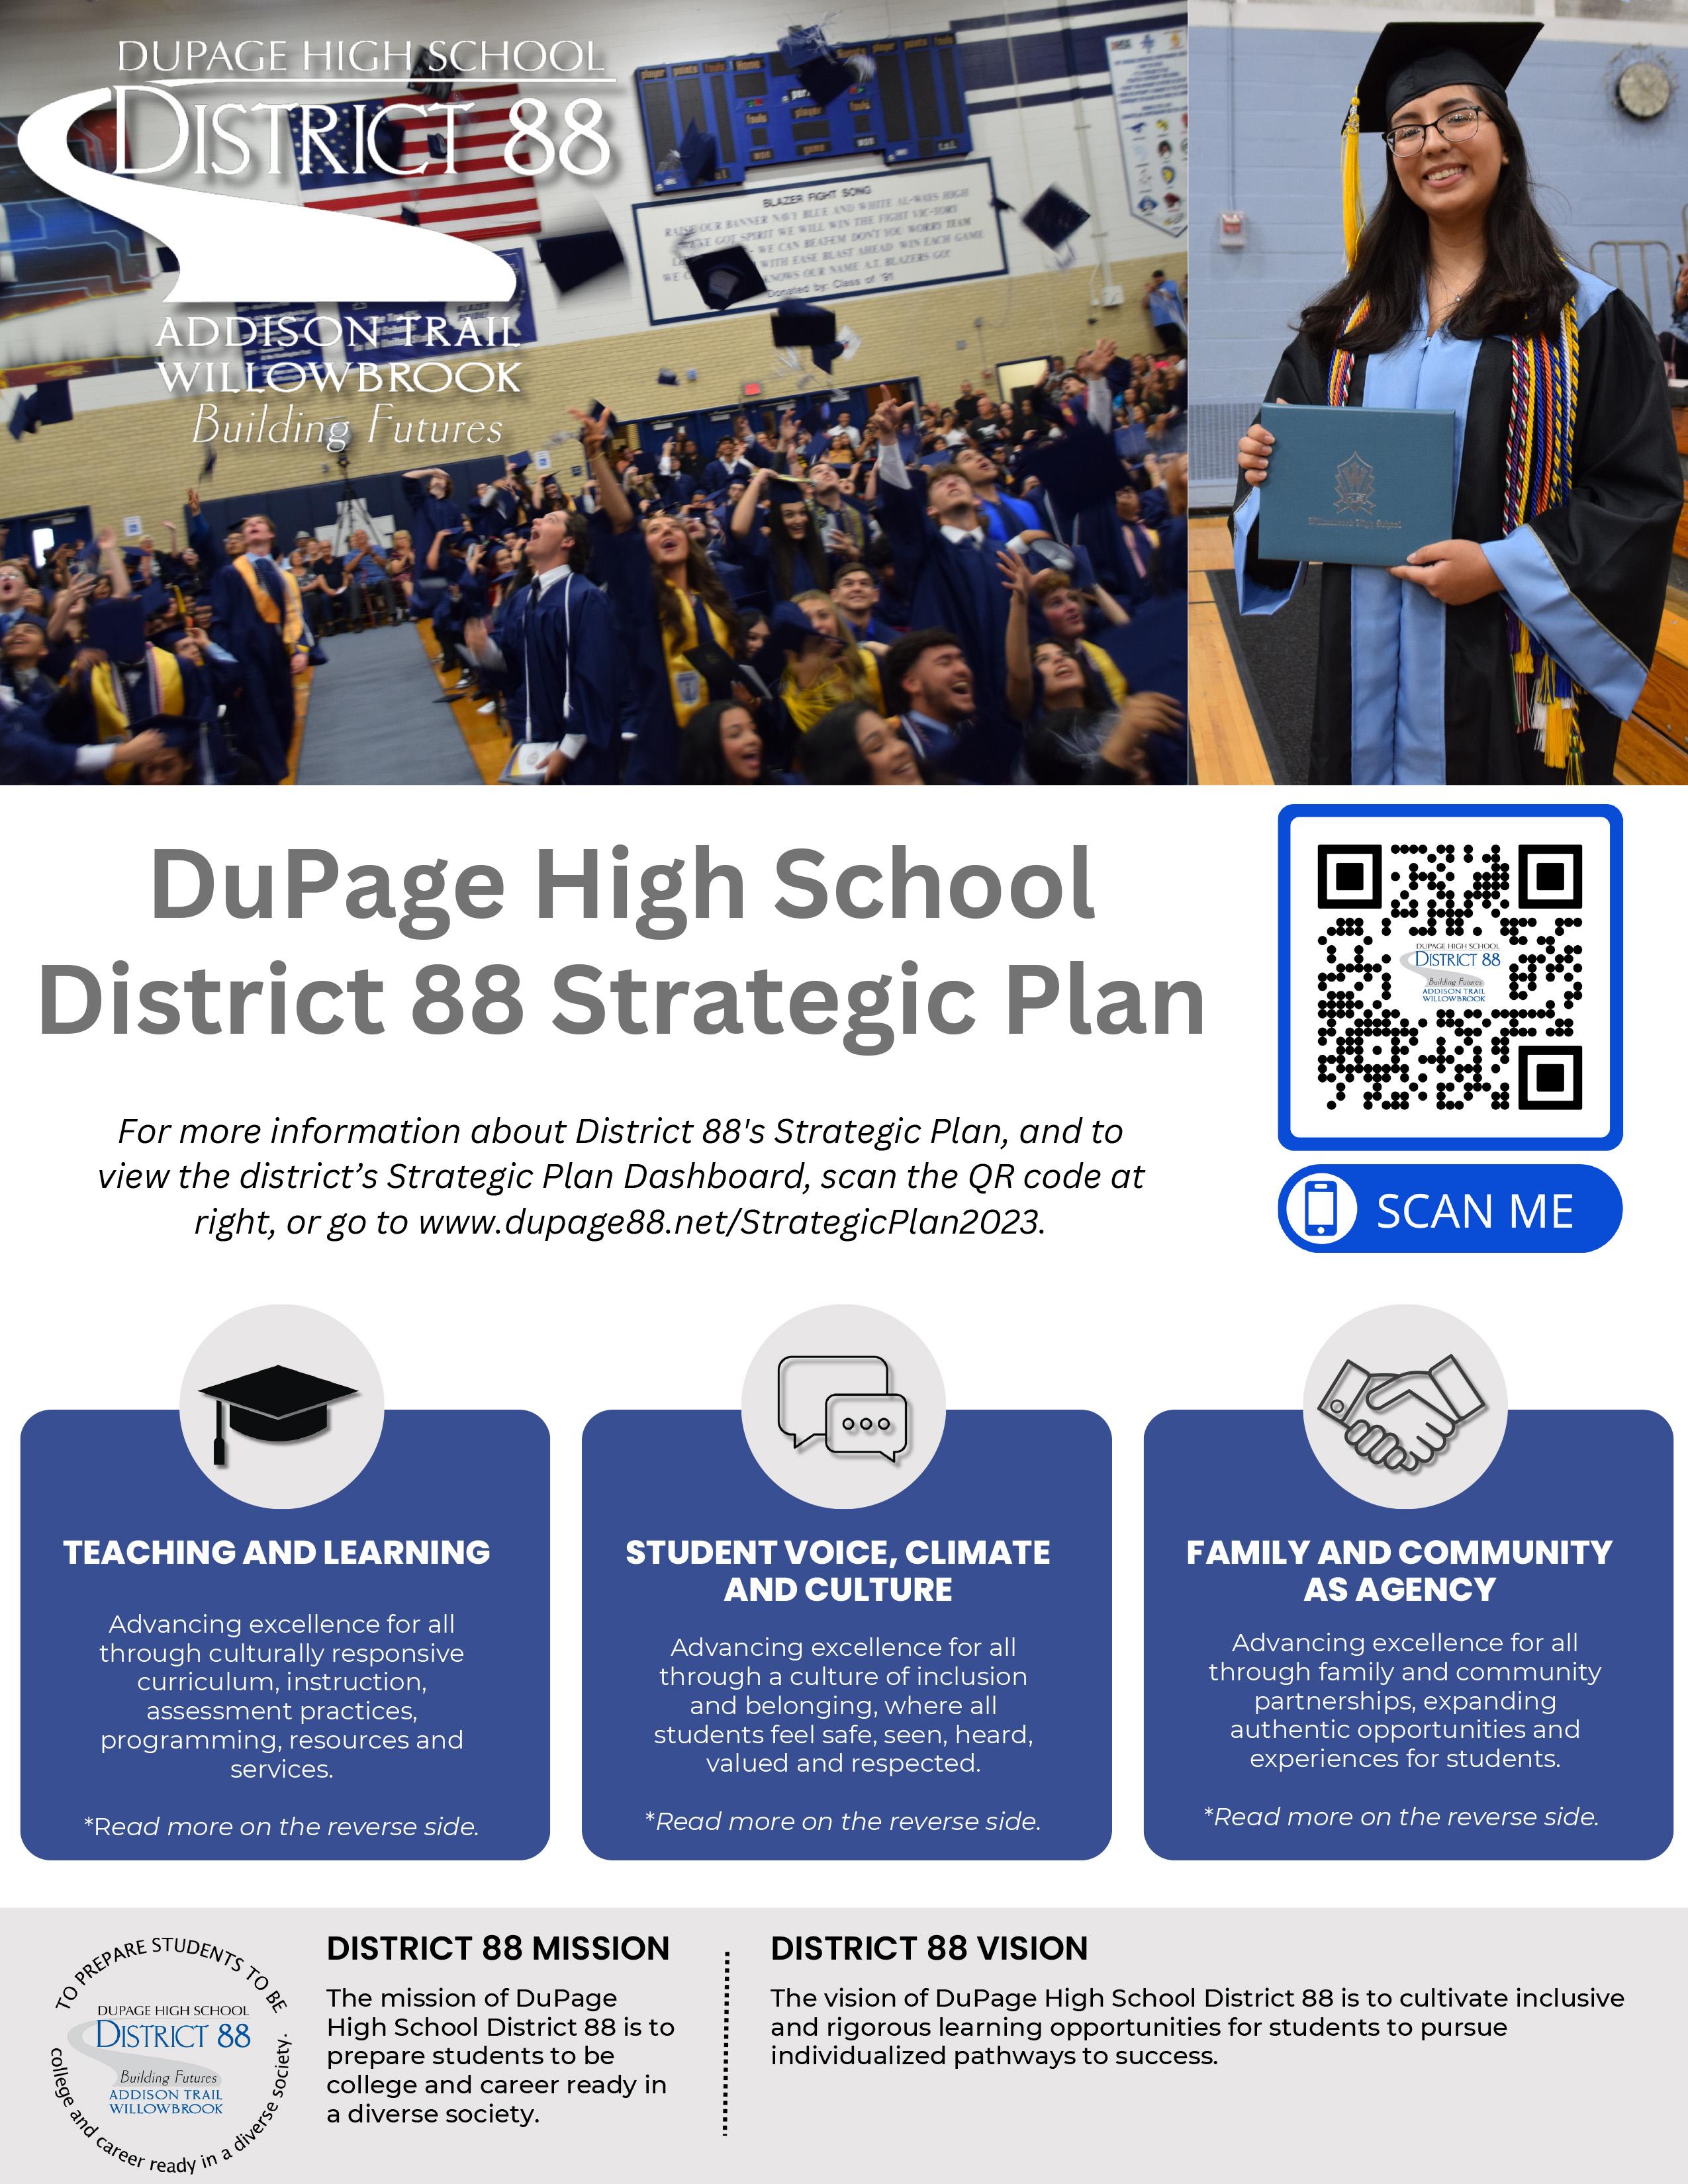 District 88 updating strategic plan to help ensure excellence for all students